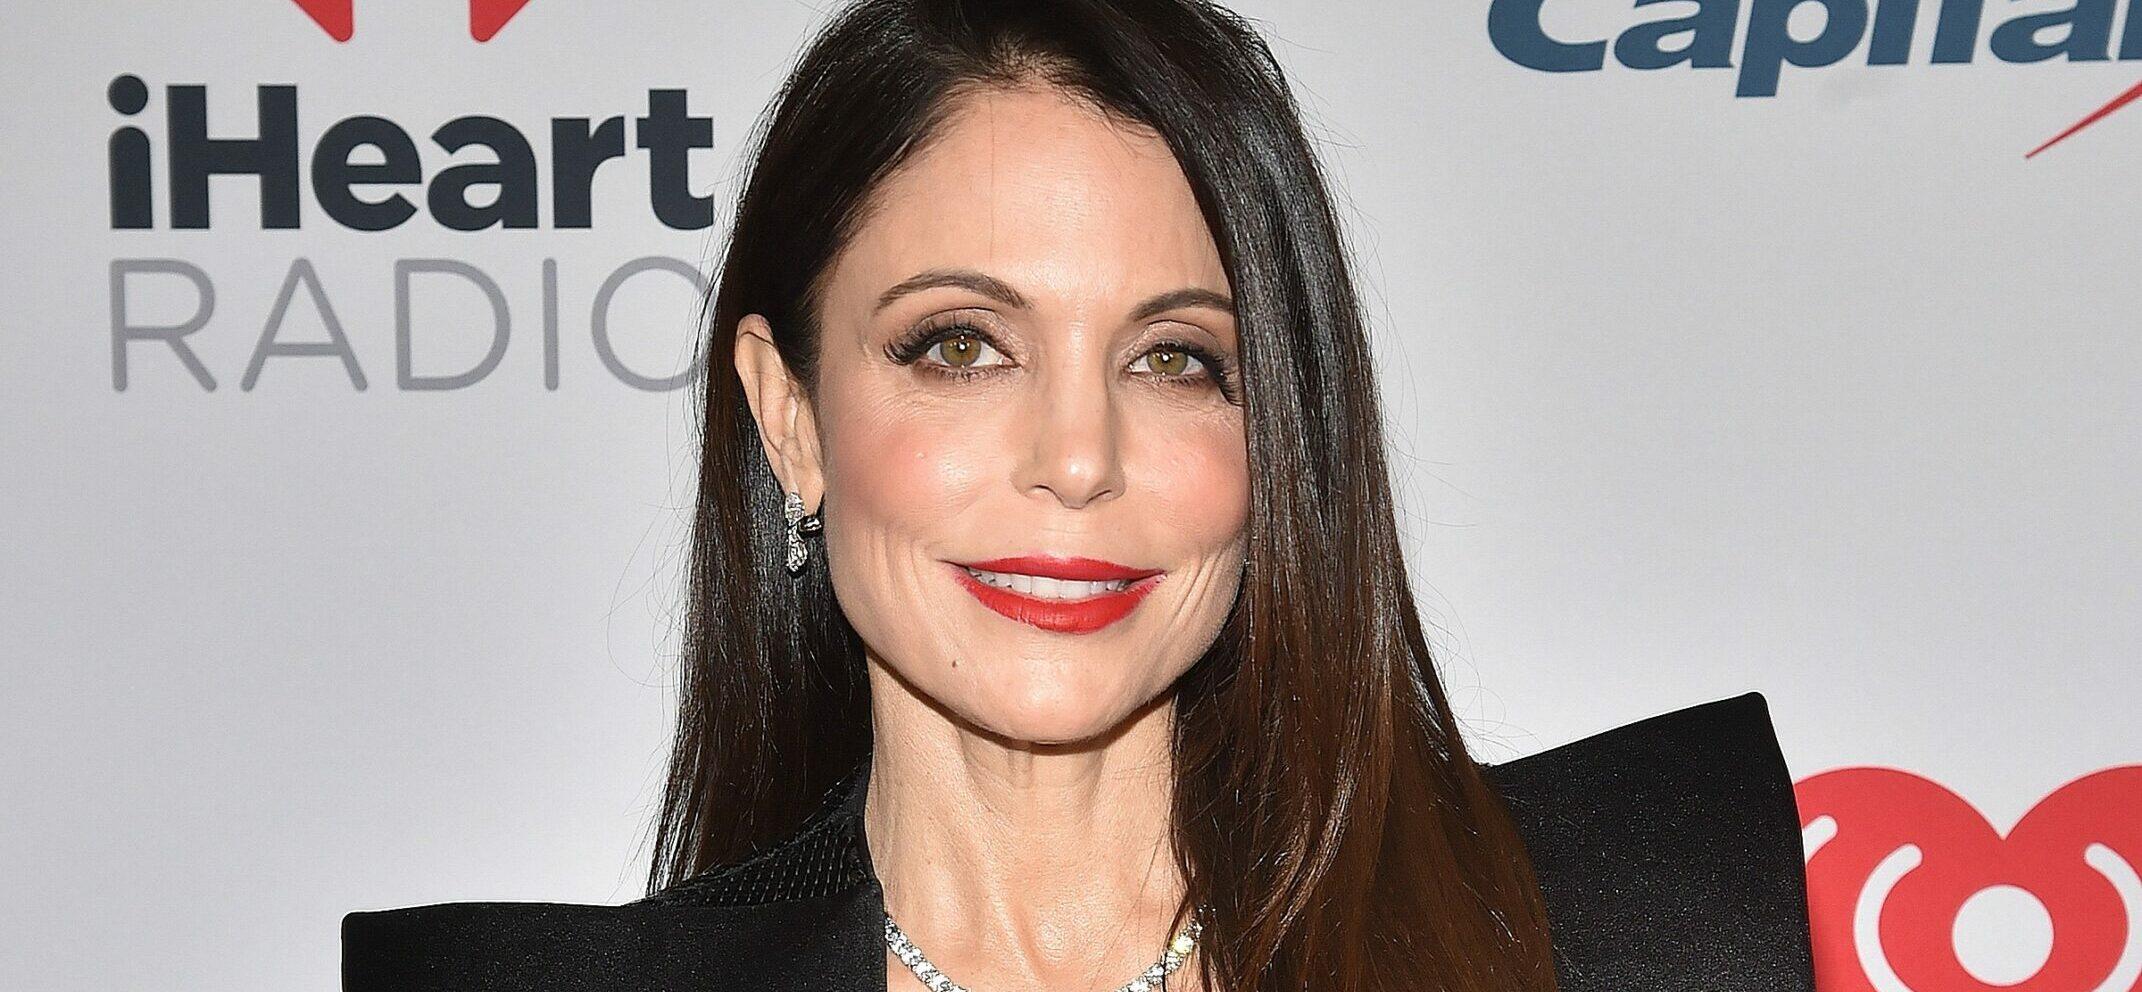 Bethenny Frankel Considers Tossing Her Balenciaga Attire, Asks Her Fans To Weigh In